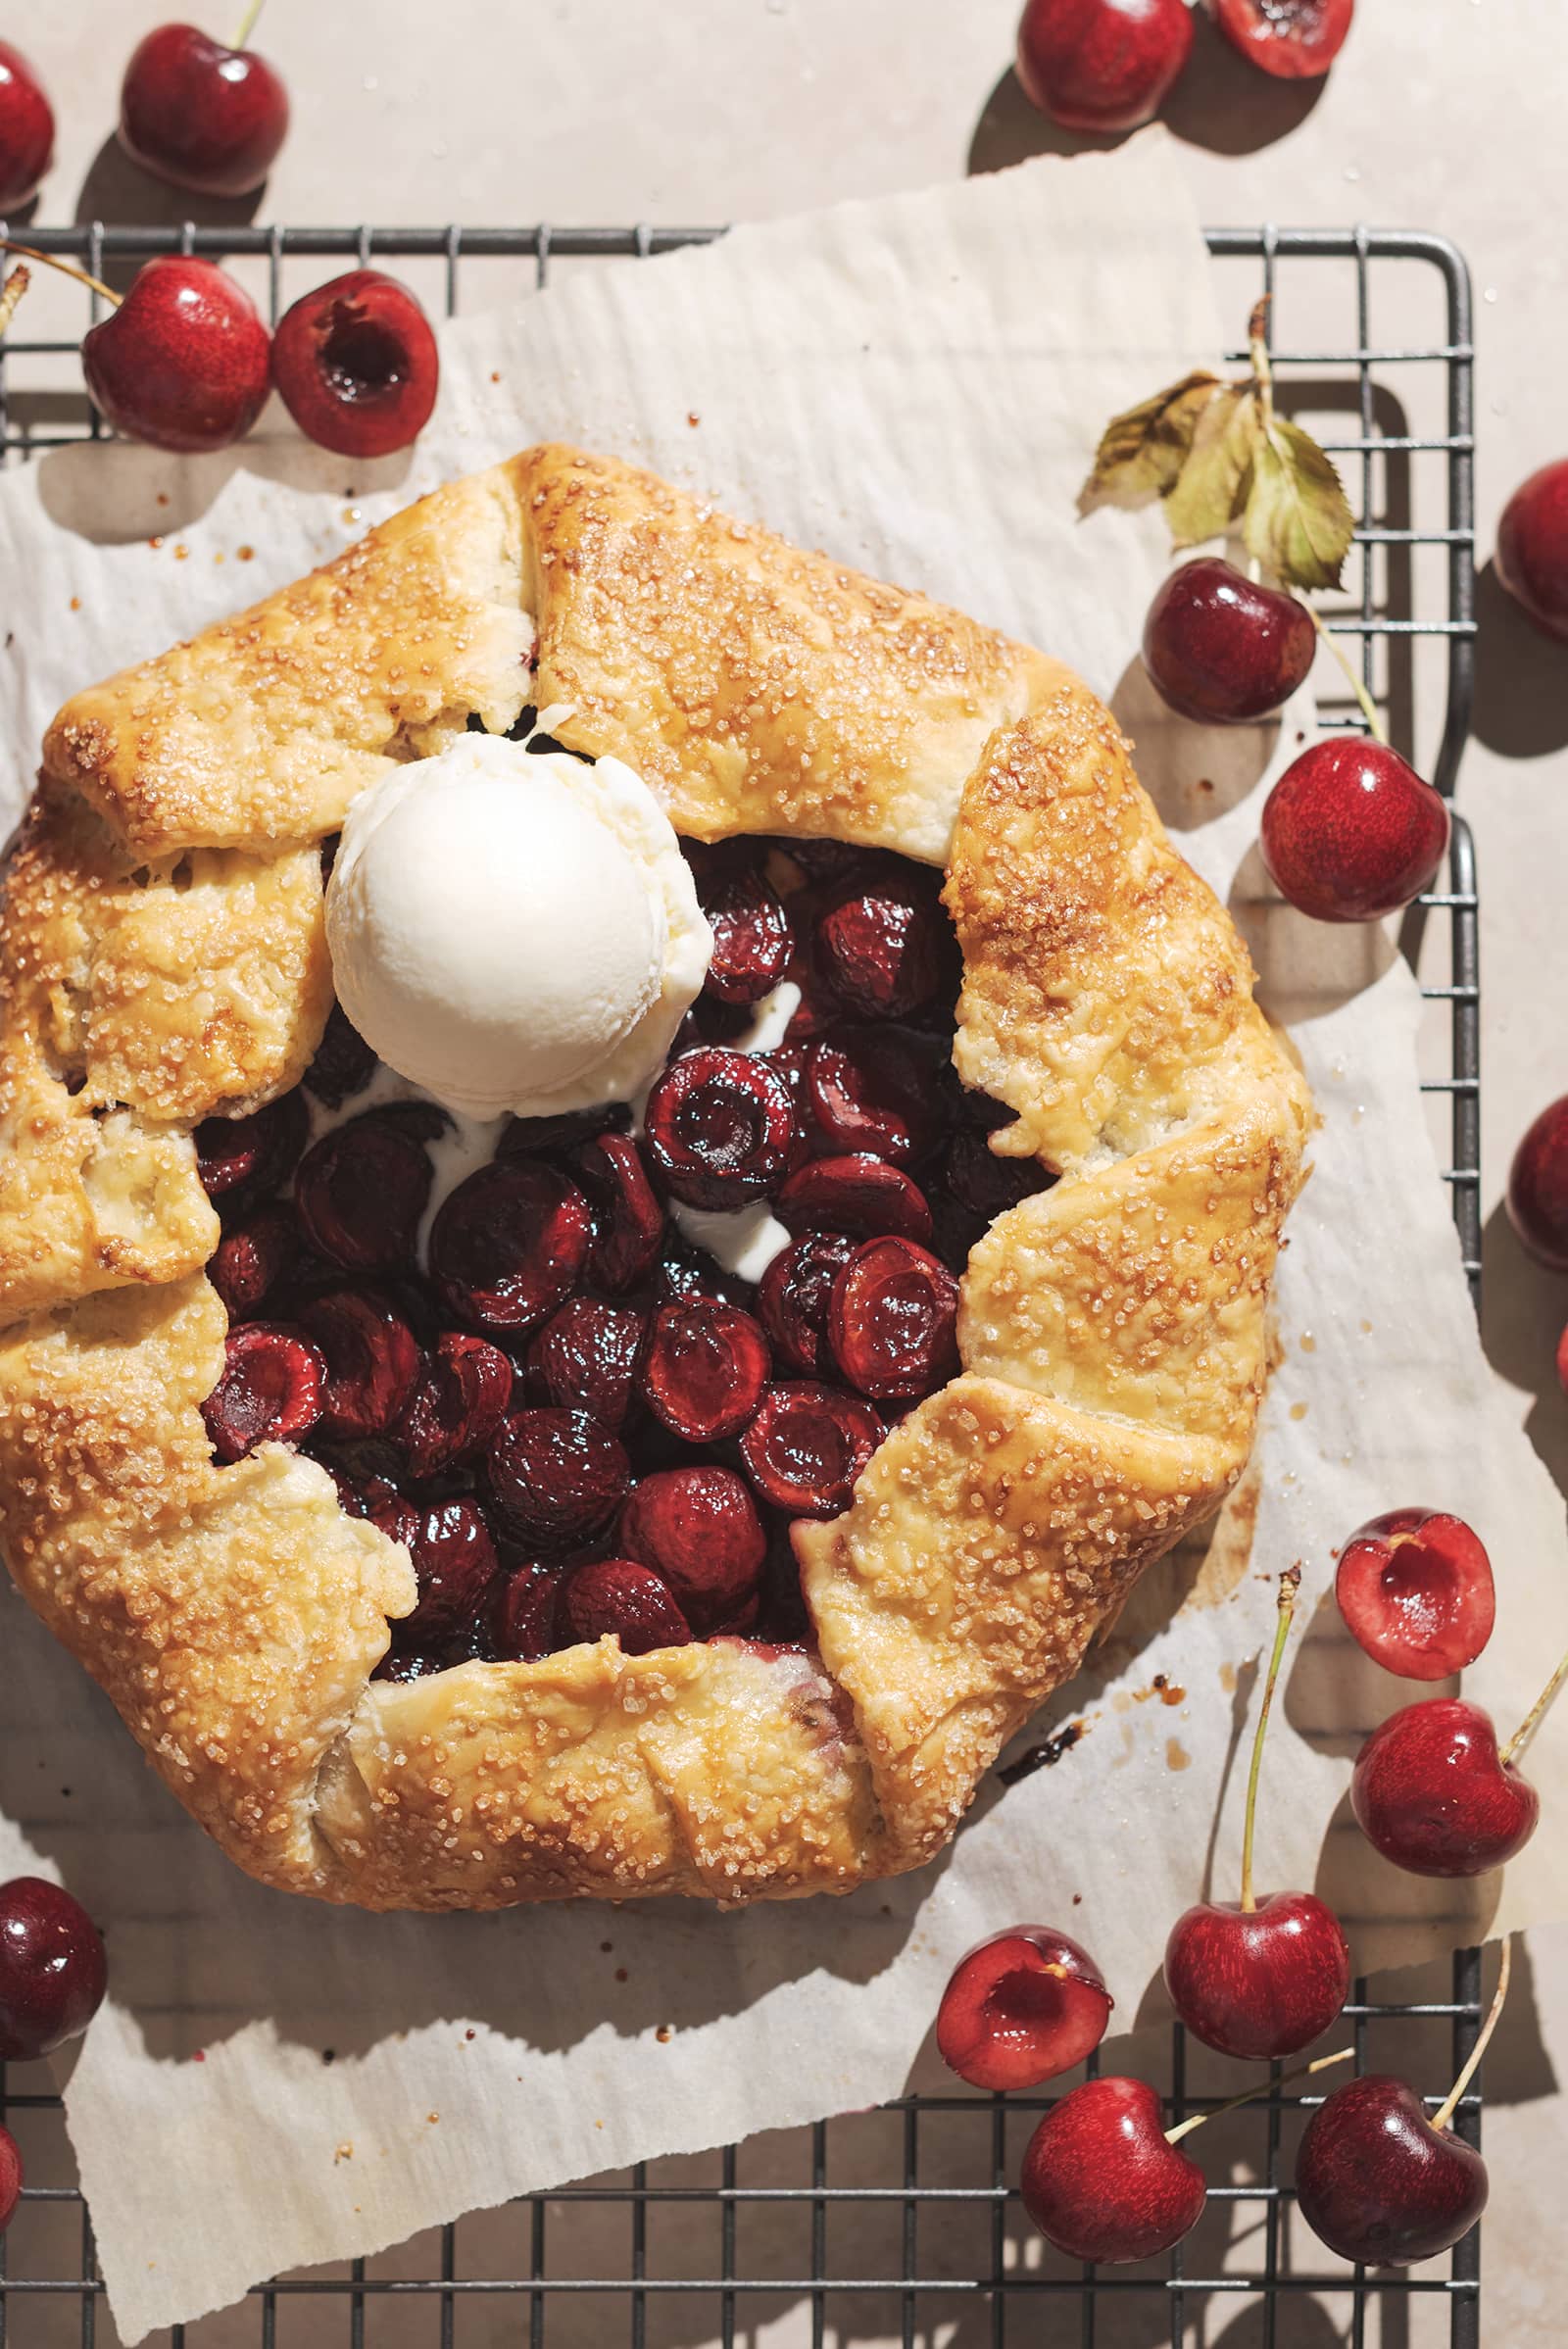 Cherry galette with a scoop of vanilla ice cream on top of it on a metal rack.